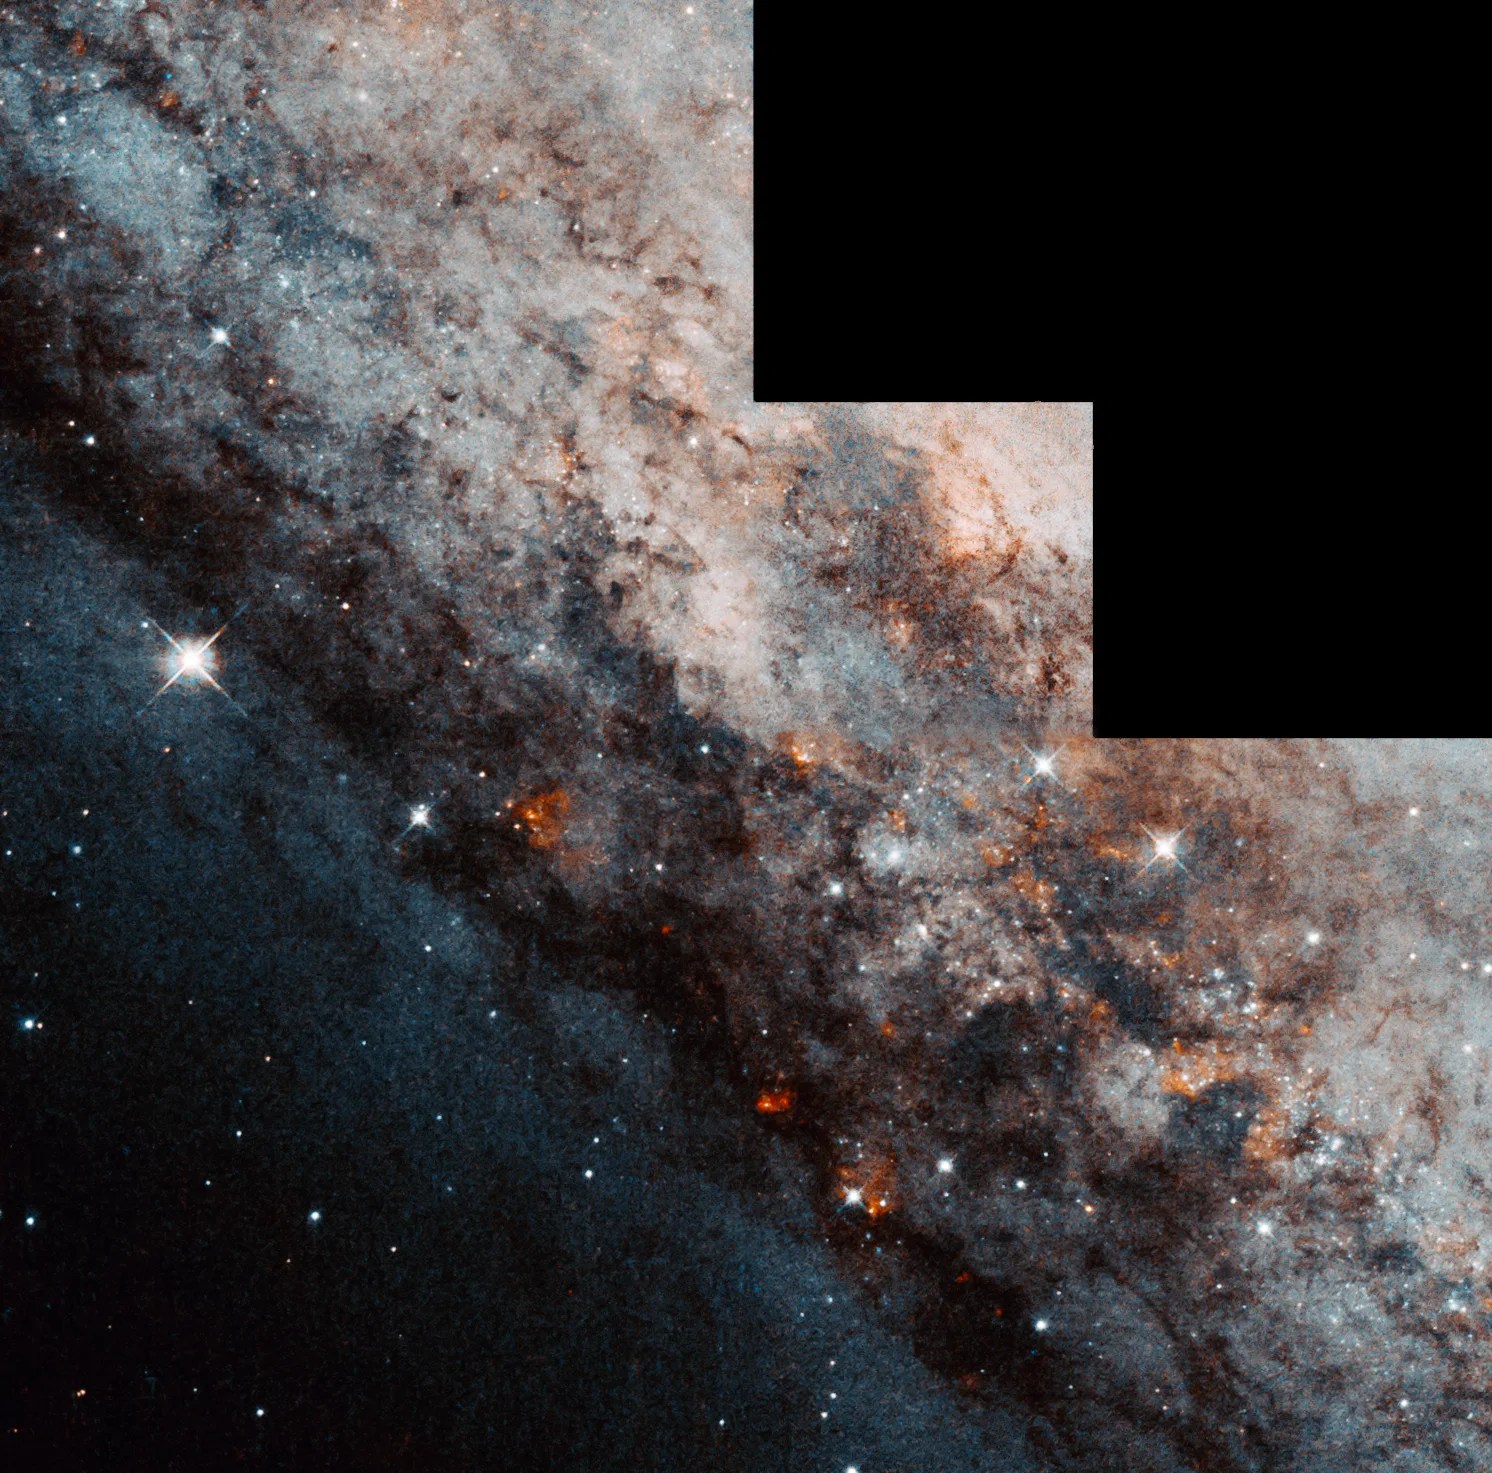 Dark lanes of dust and gas are scattered with red and white stars. The image has the step-shape format caused by the WFPC2 camera.